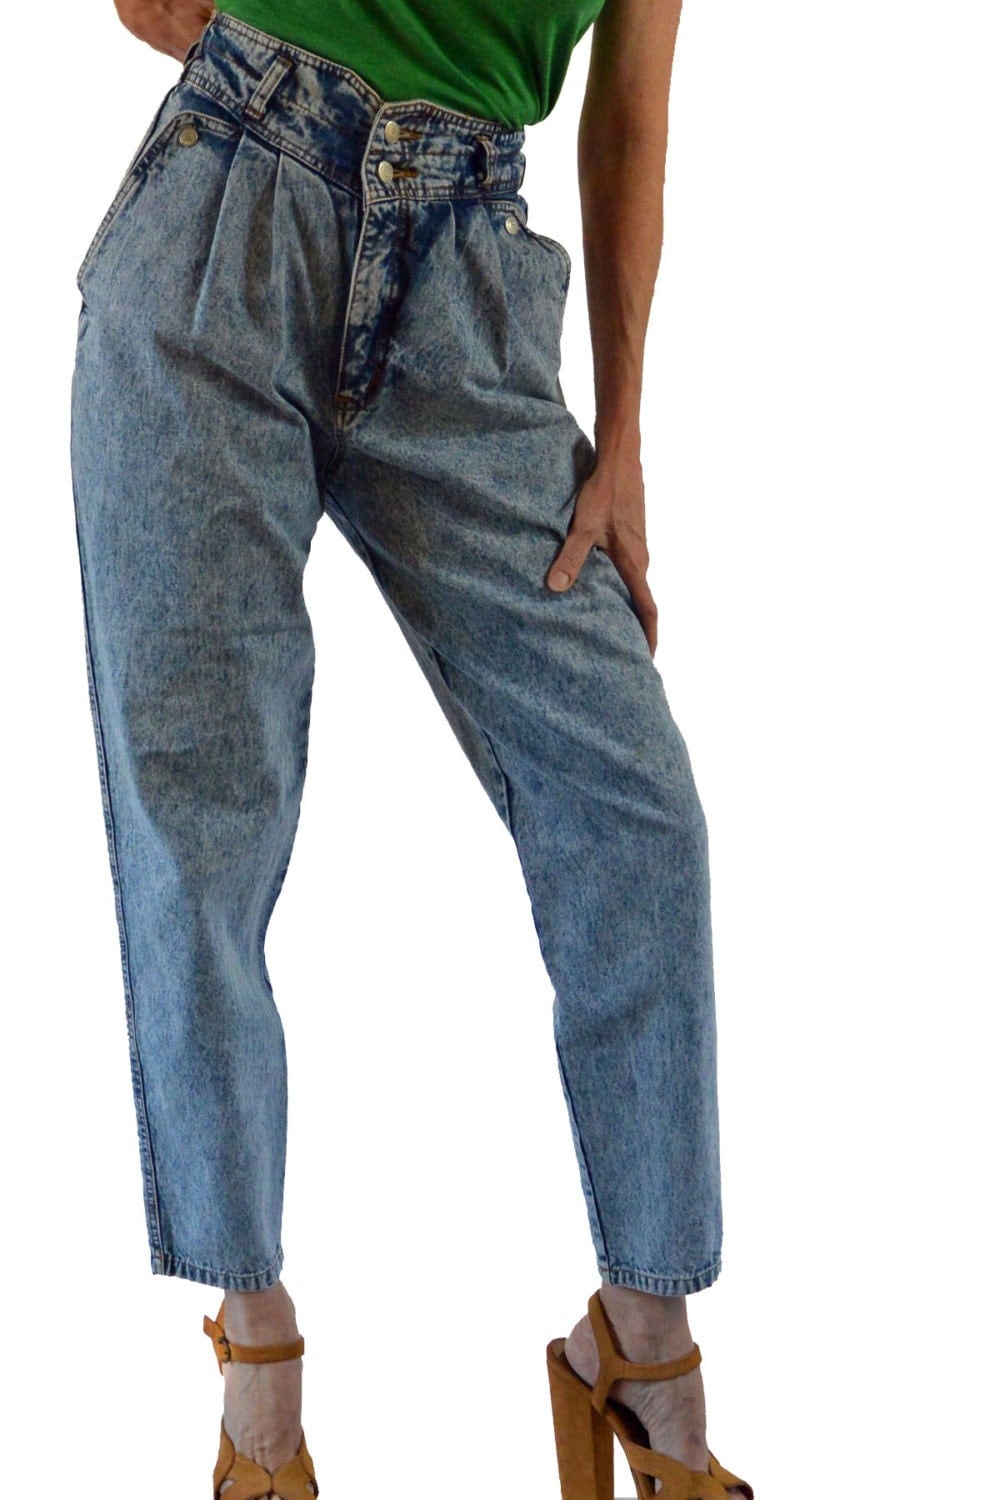 80s vintage high waisted jeans / Acid Wash Jeans / Pleated